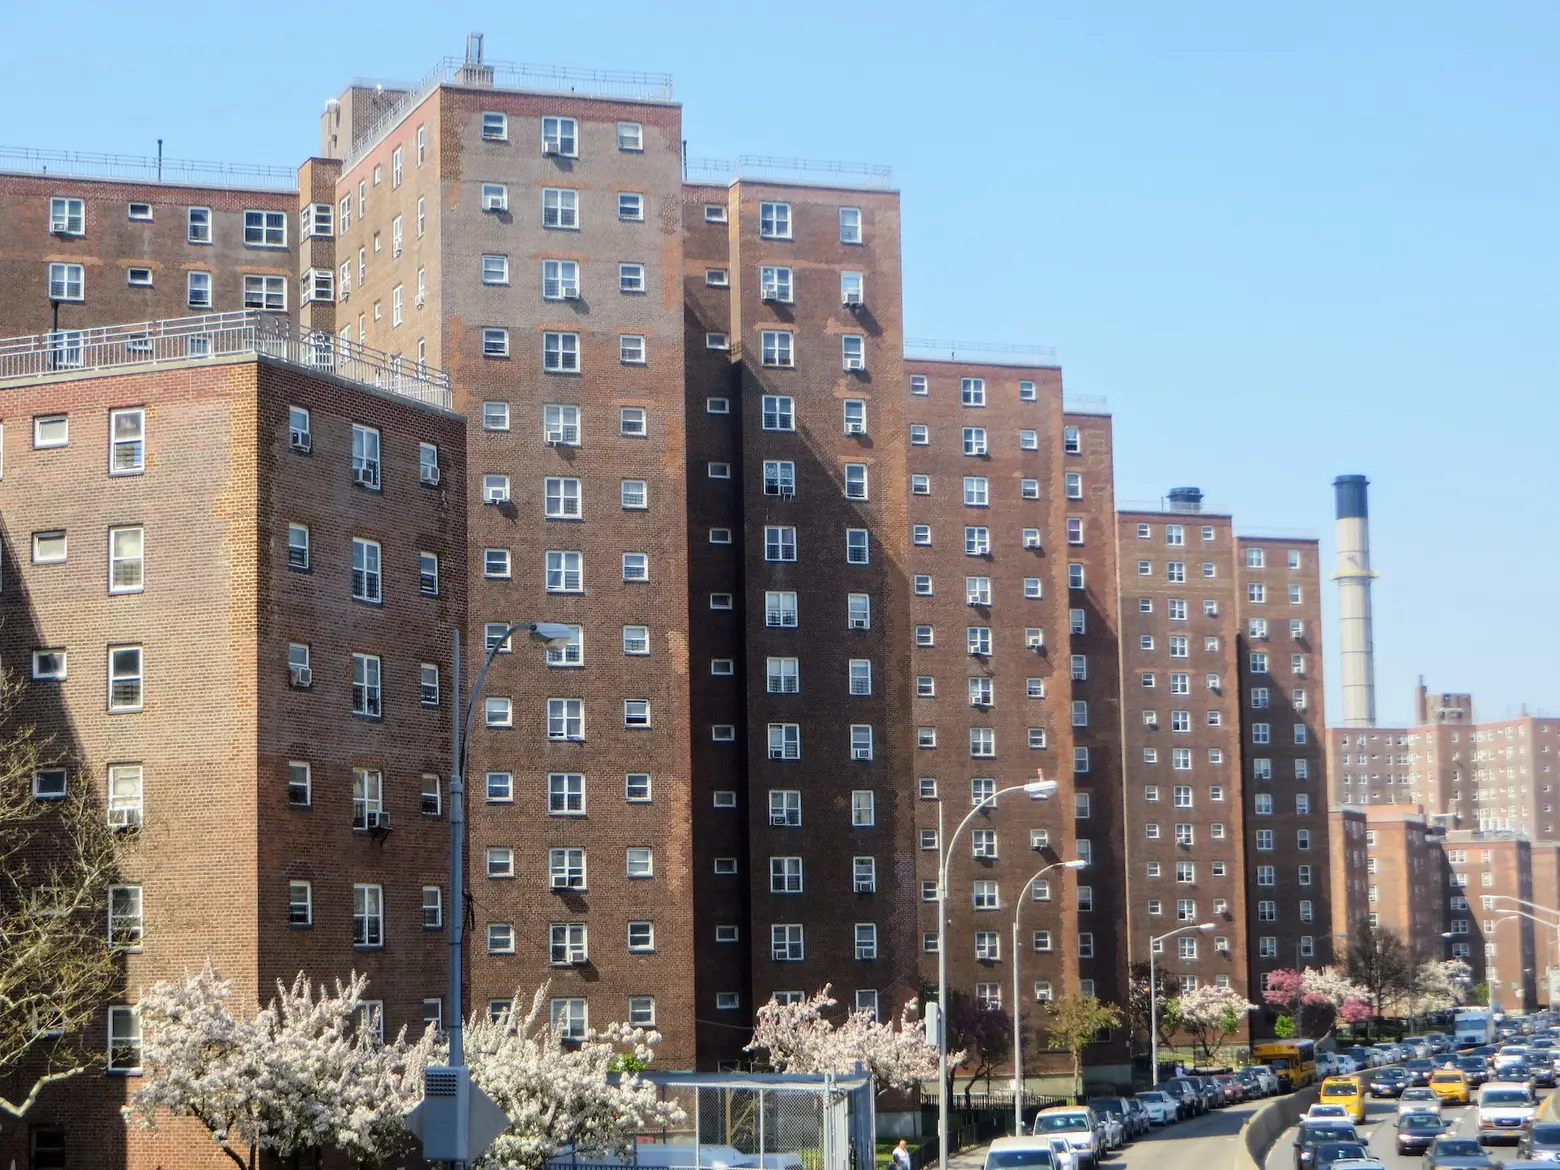 Investigation underway after arsenic is found in water at East Village public housing complex